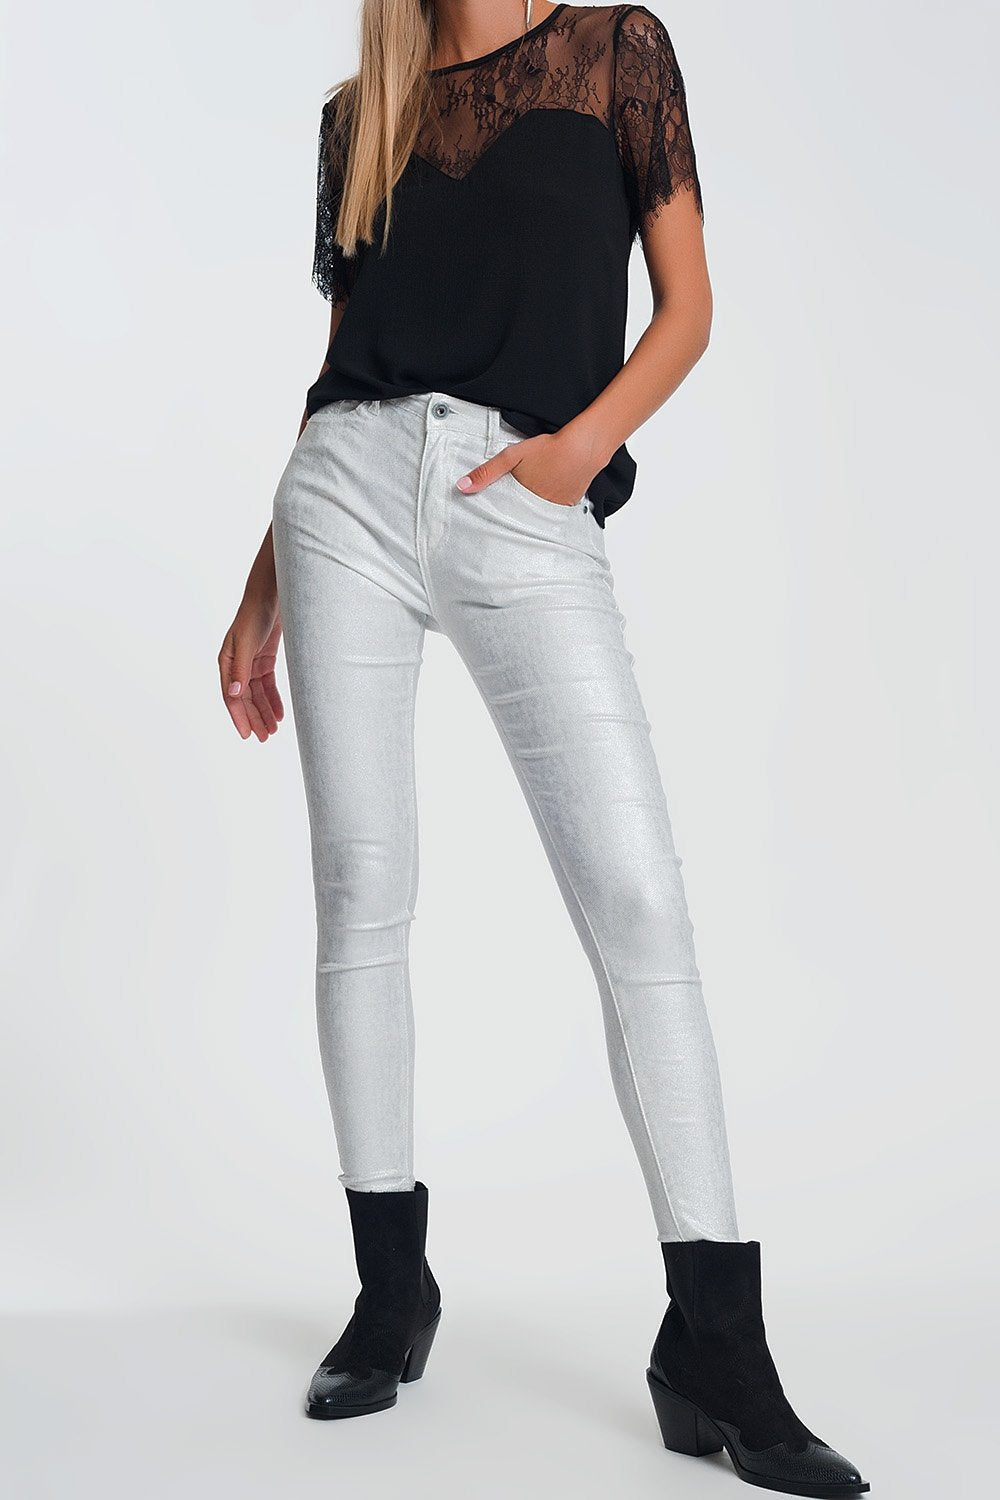 Super Skinny High Waisted Pants With Silver Sparkle in White - LOLA LUXE